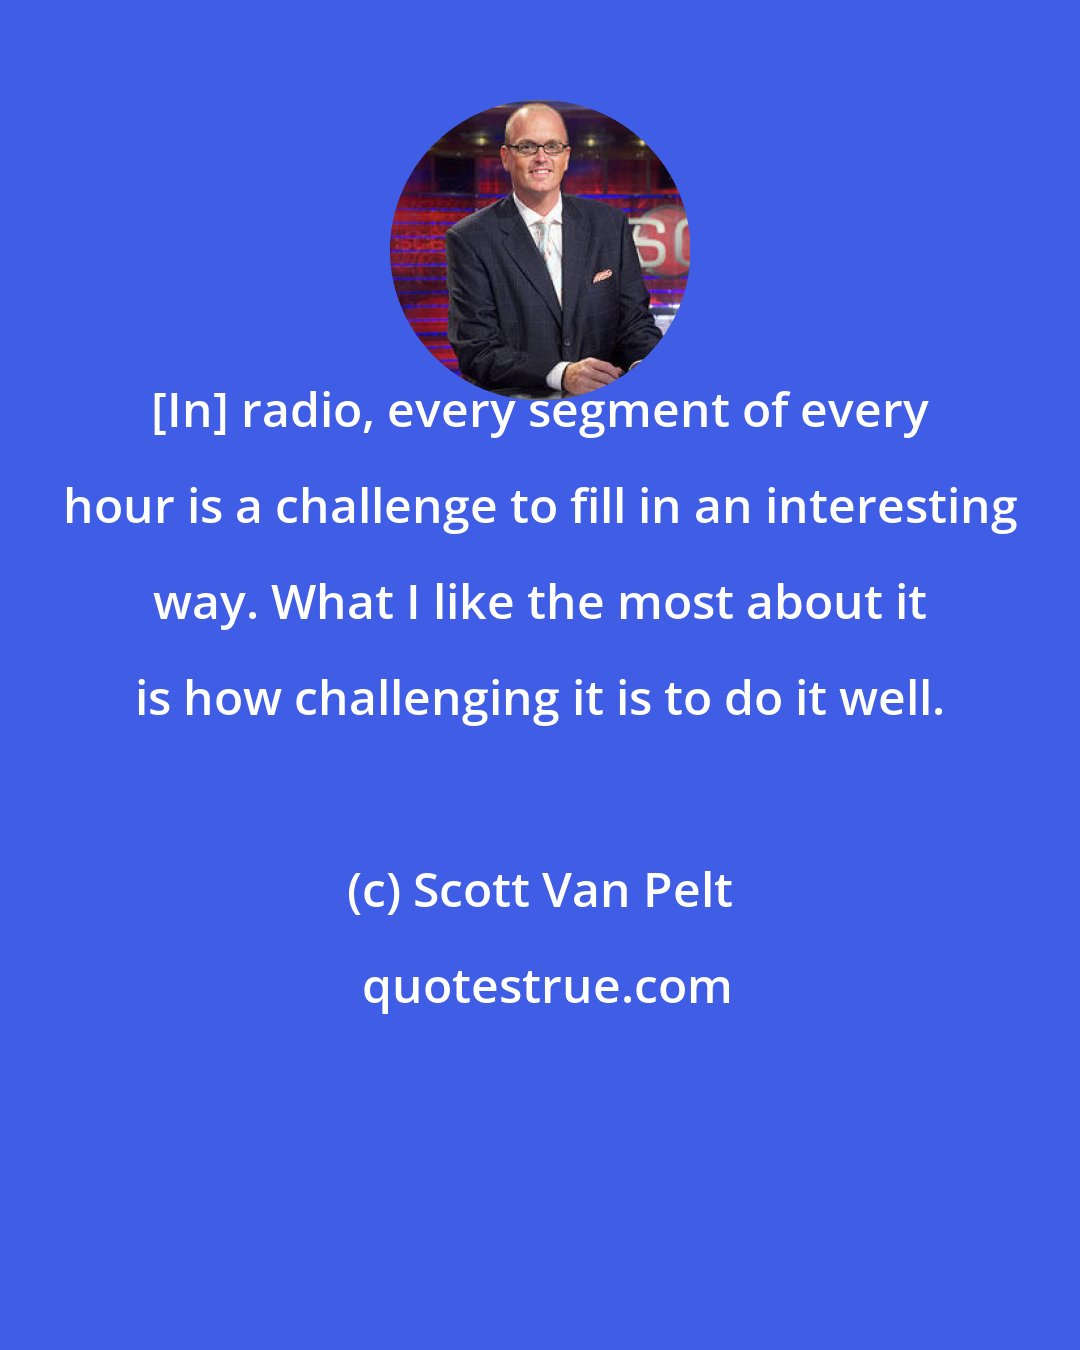 Scott Van Pelt: [In] radio, every segment of every hour is a challenge to fill in an interesting way. What I like the most about it is how challenging it is to do it well.